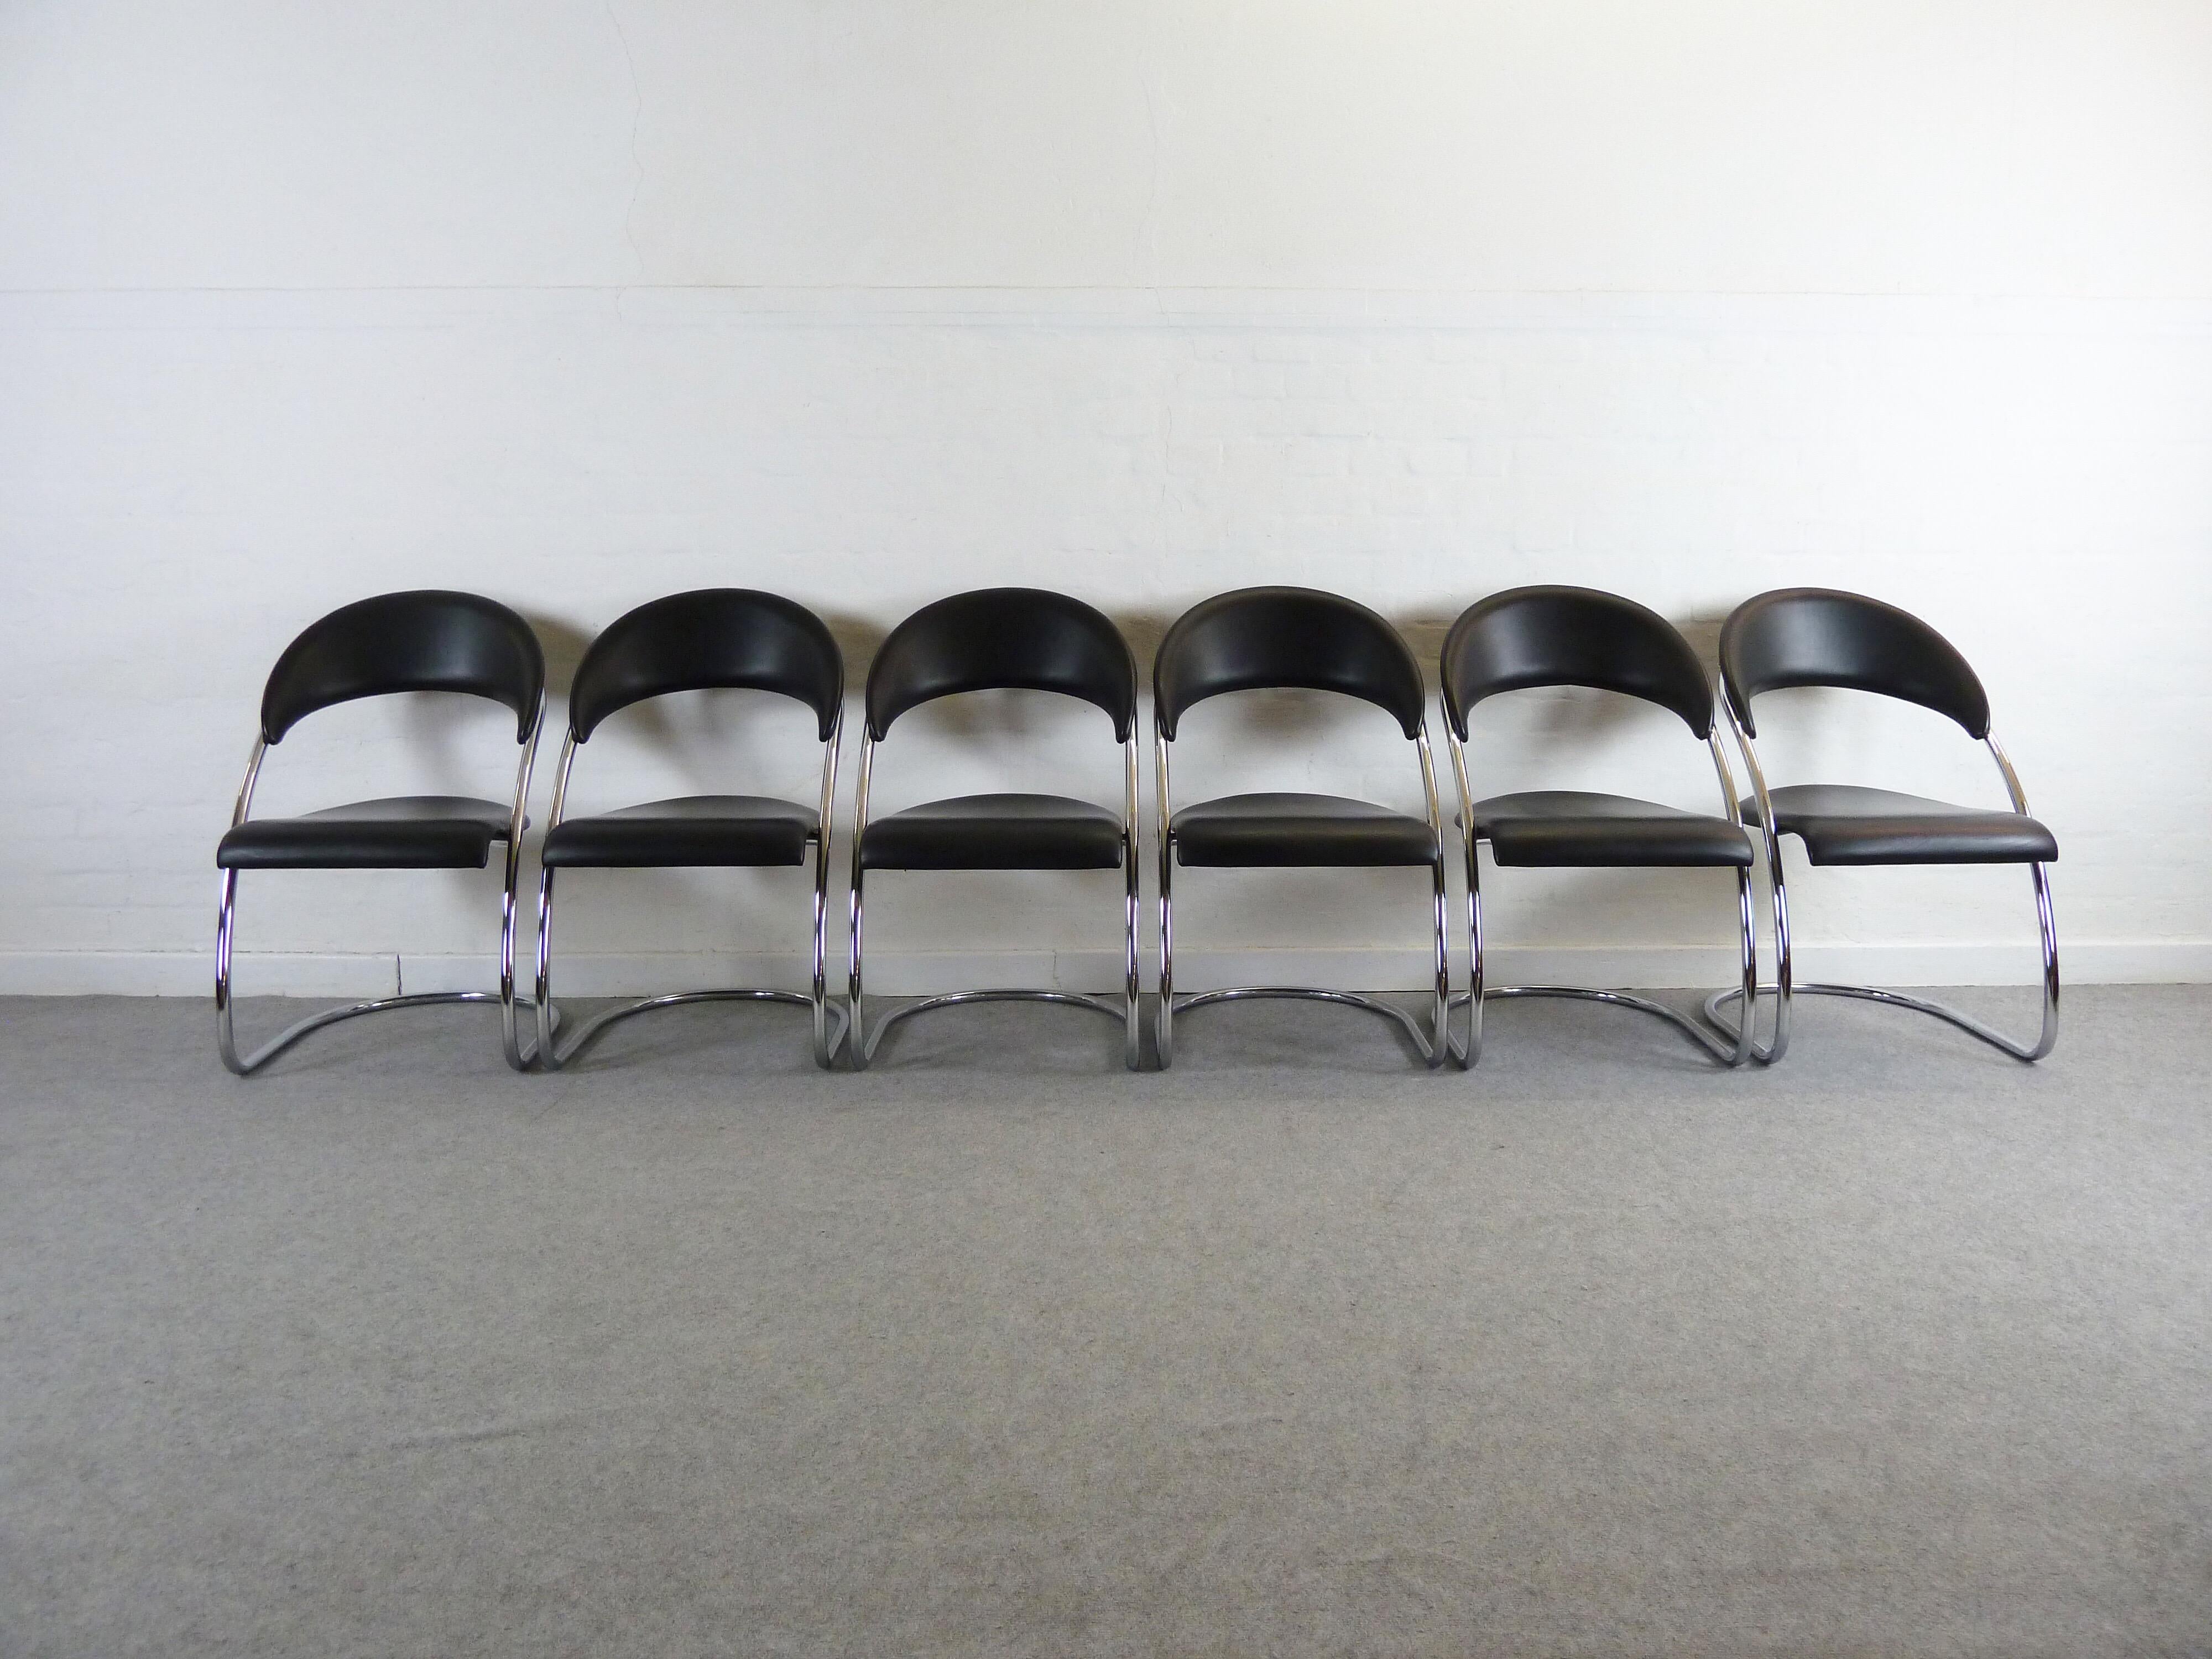 Set of 6 Cantilevered Chairs Thonet Bauhaus Model ST14 Hans Luckhardt In Good Condition For Sale In Halle, DE